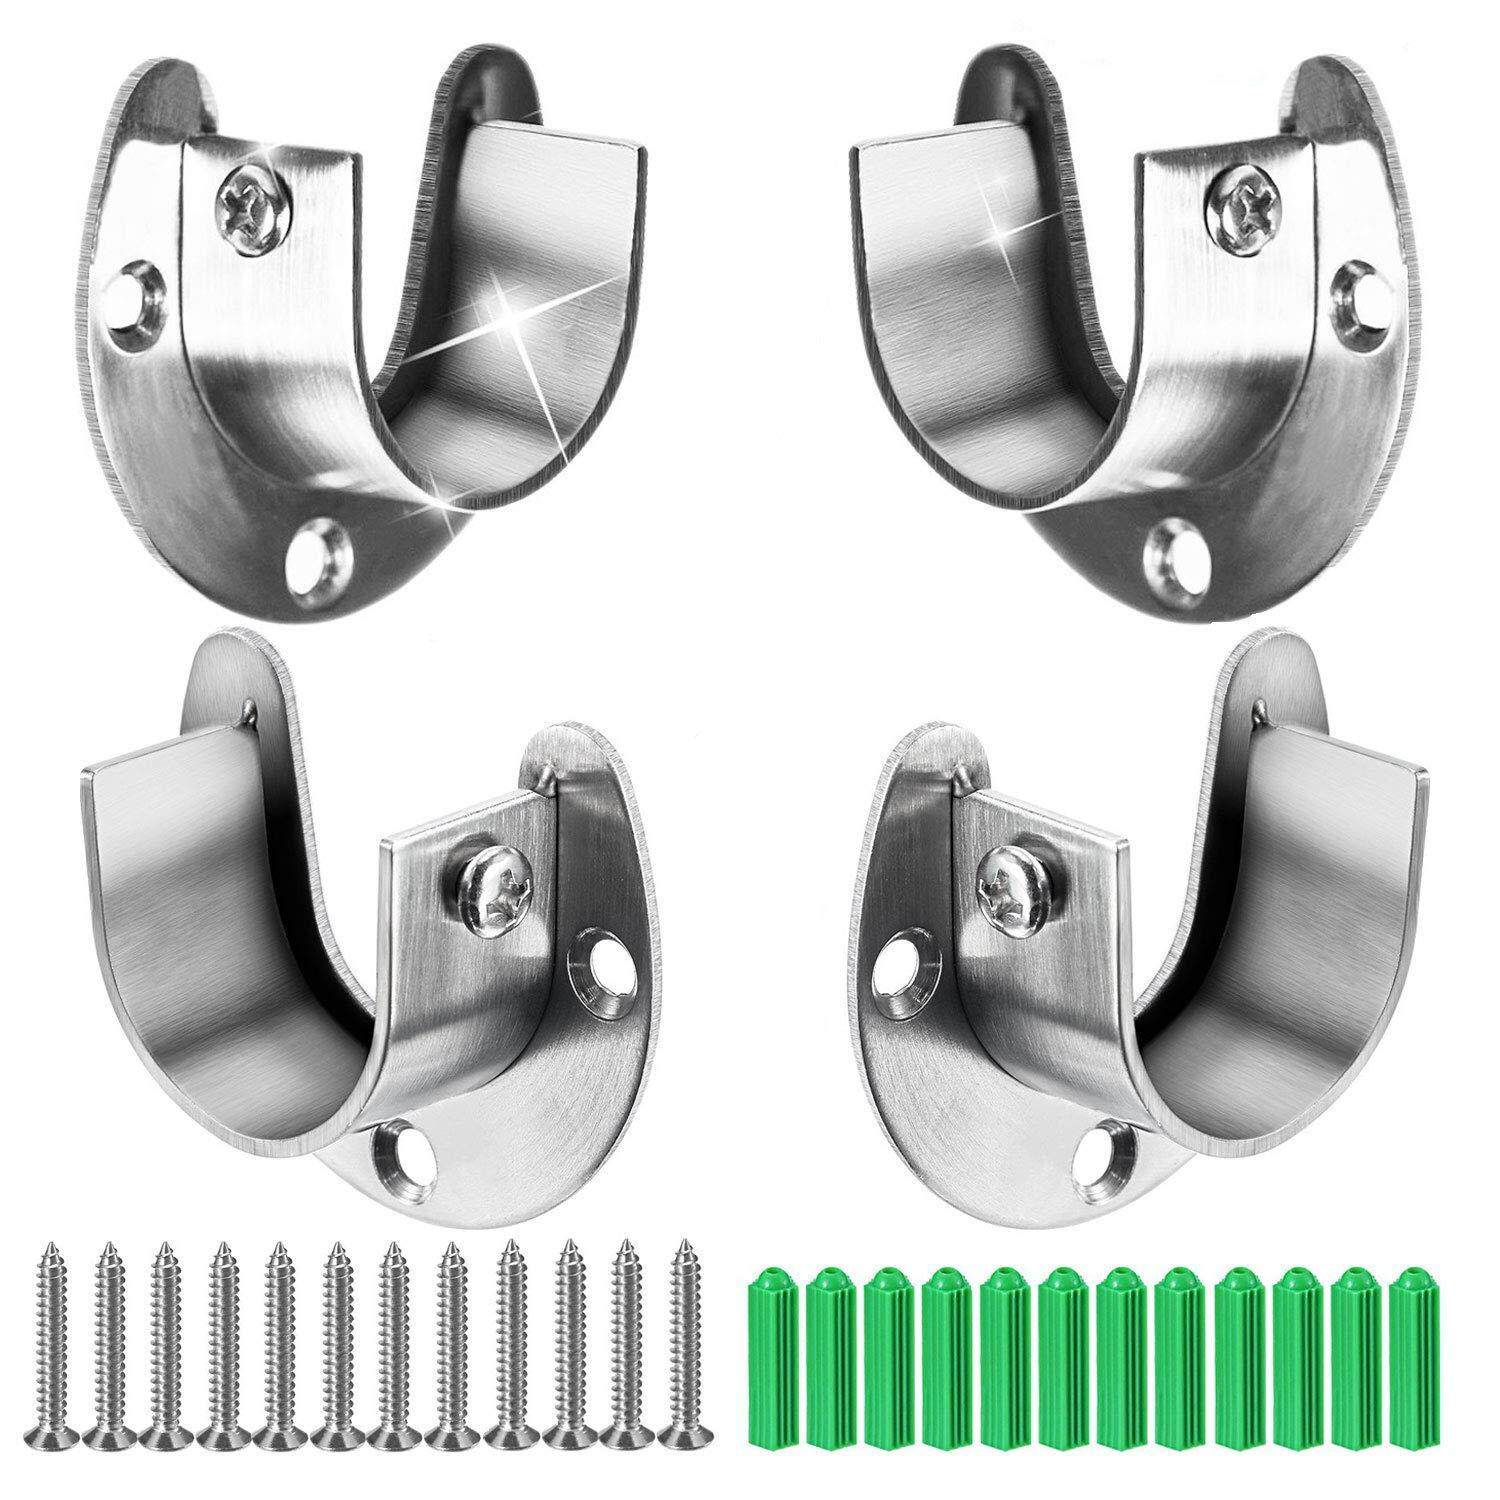 N /A JINXM 4 Pcs Flange Rod Holder Closet Pole Sockets U Shaped Supports Stainless Steel Closet Pole Sockets Easy Installation Or Quick Removal 